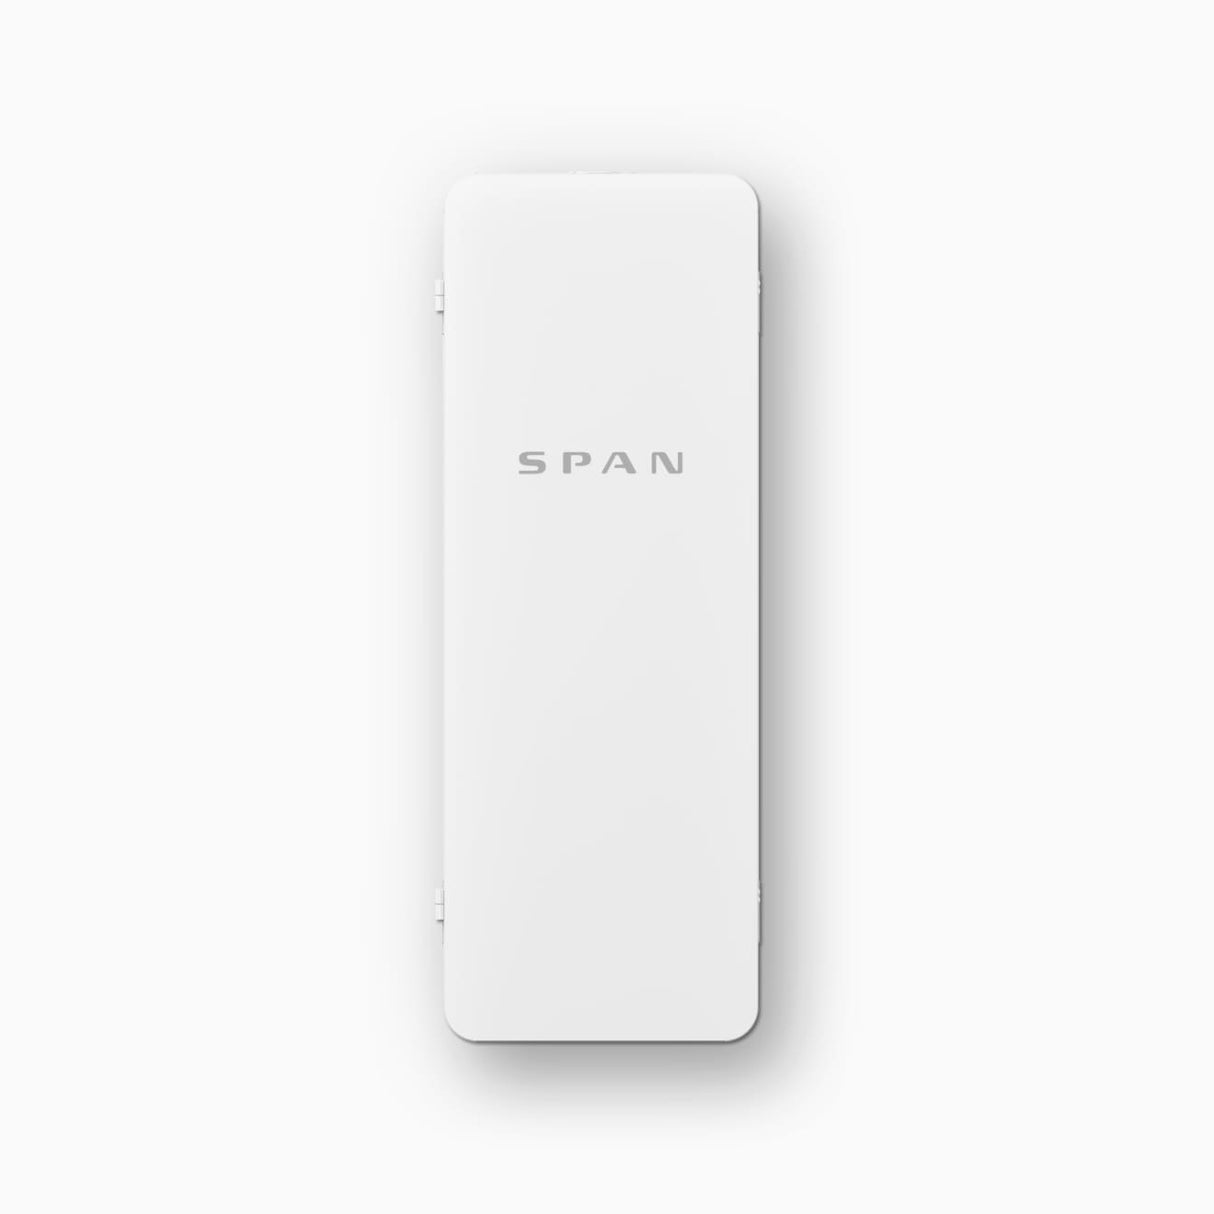 Span | The Smart Electrical Panel